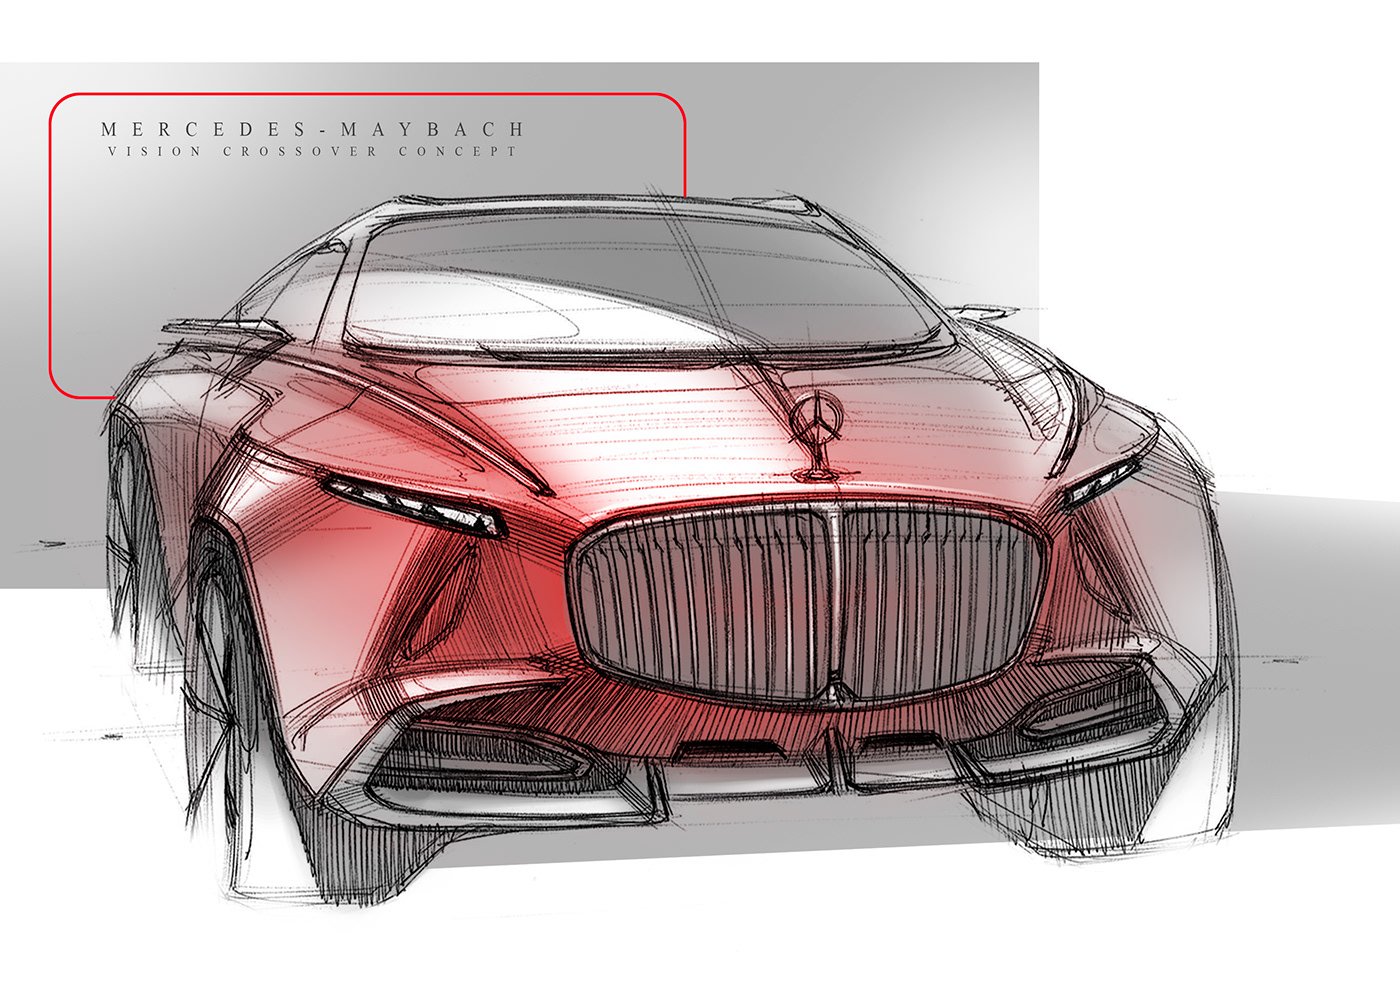 mercedes-maybach crossover vision 5